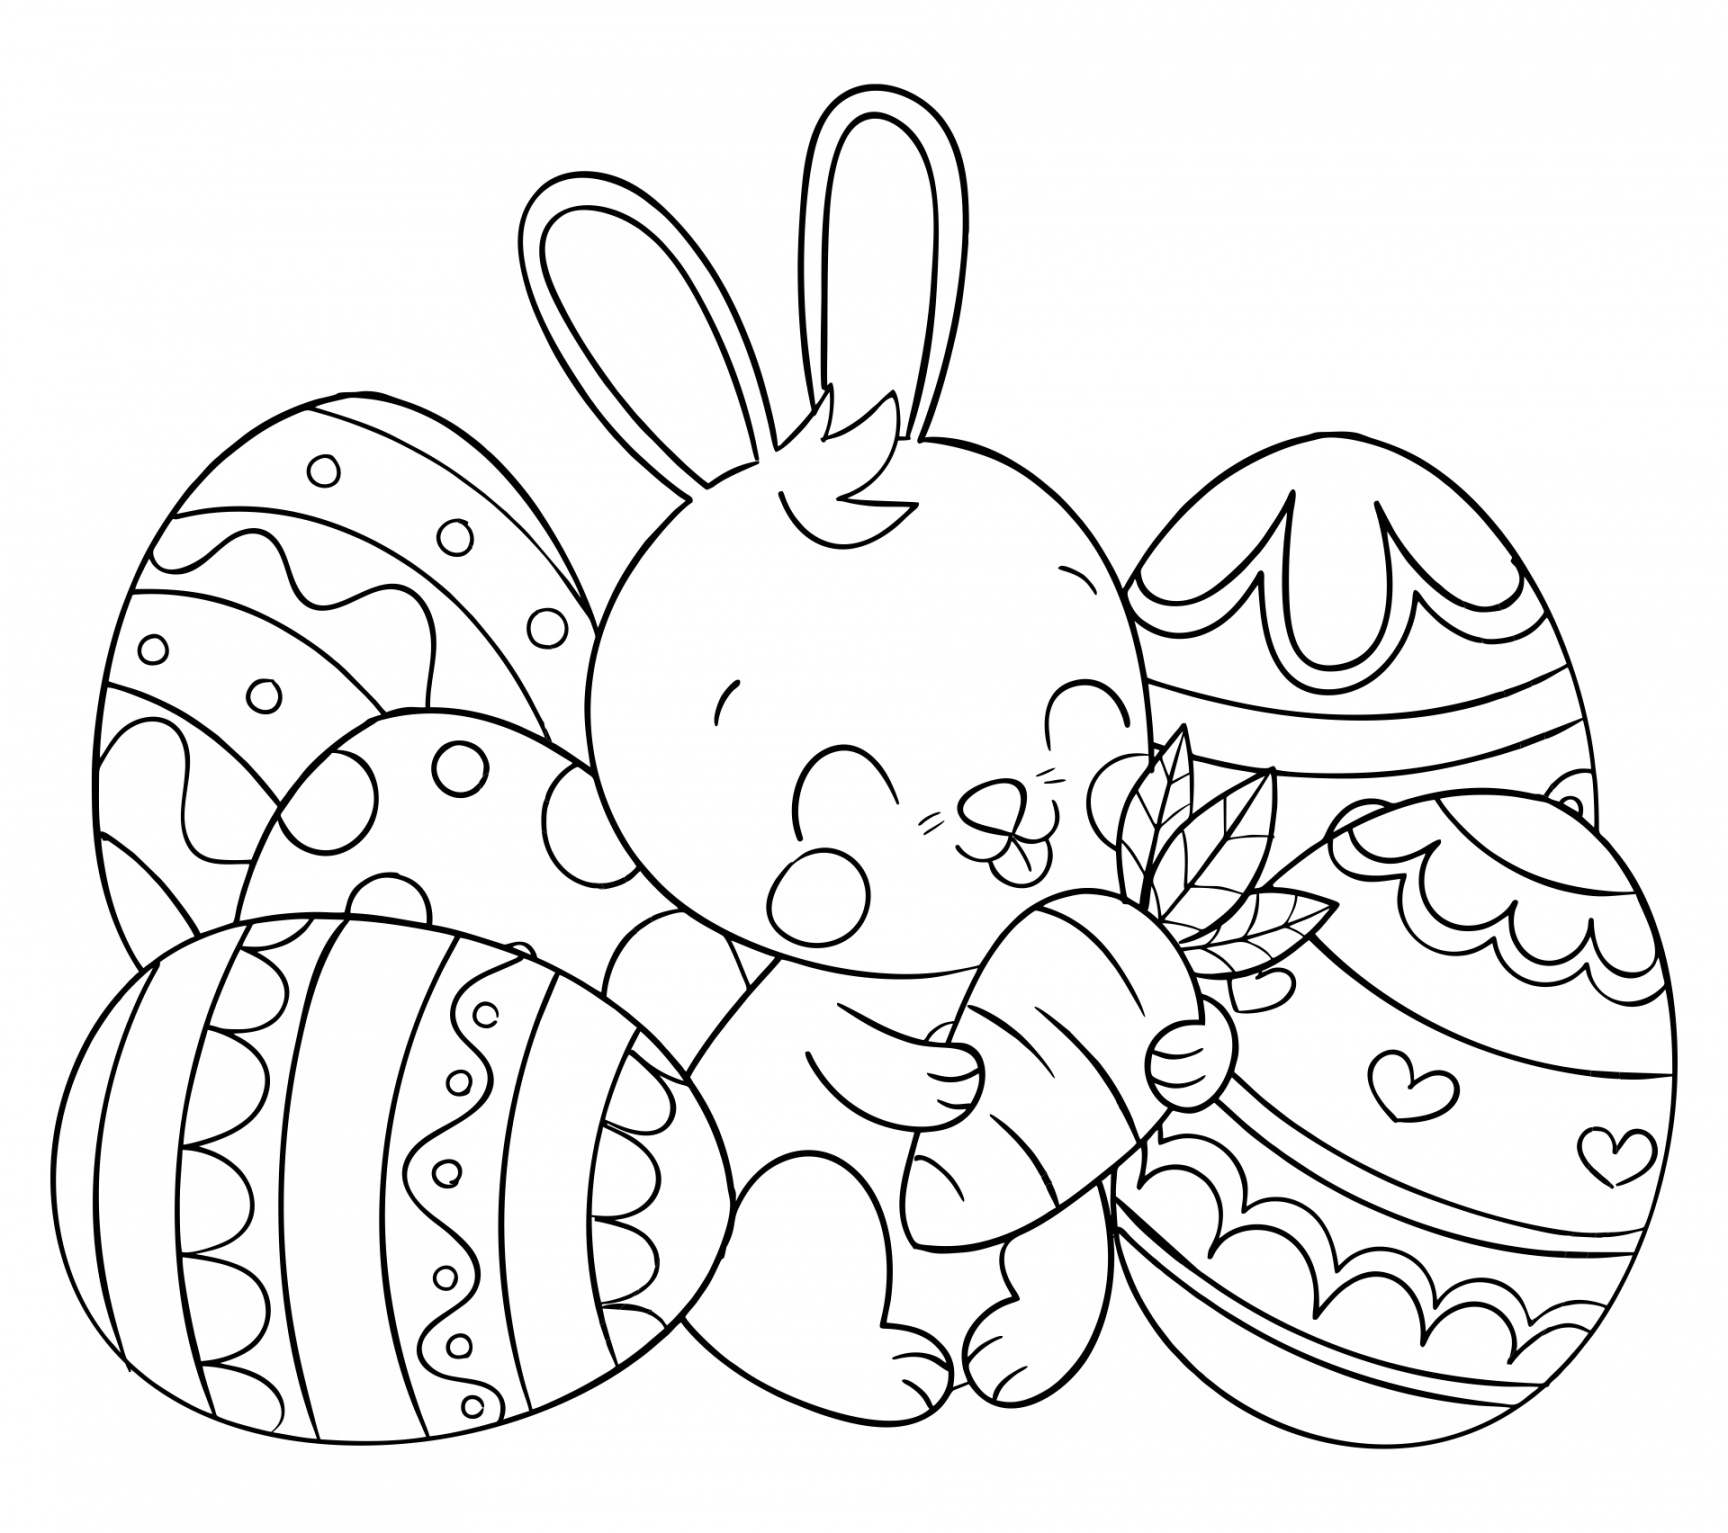 Easter Coloring Pages Free Printable - Printable -  Best Free Printable Easter Egg Coloring Page - printablee